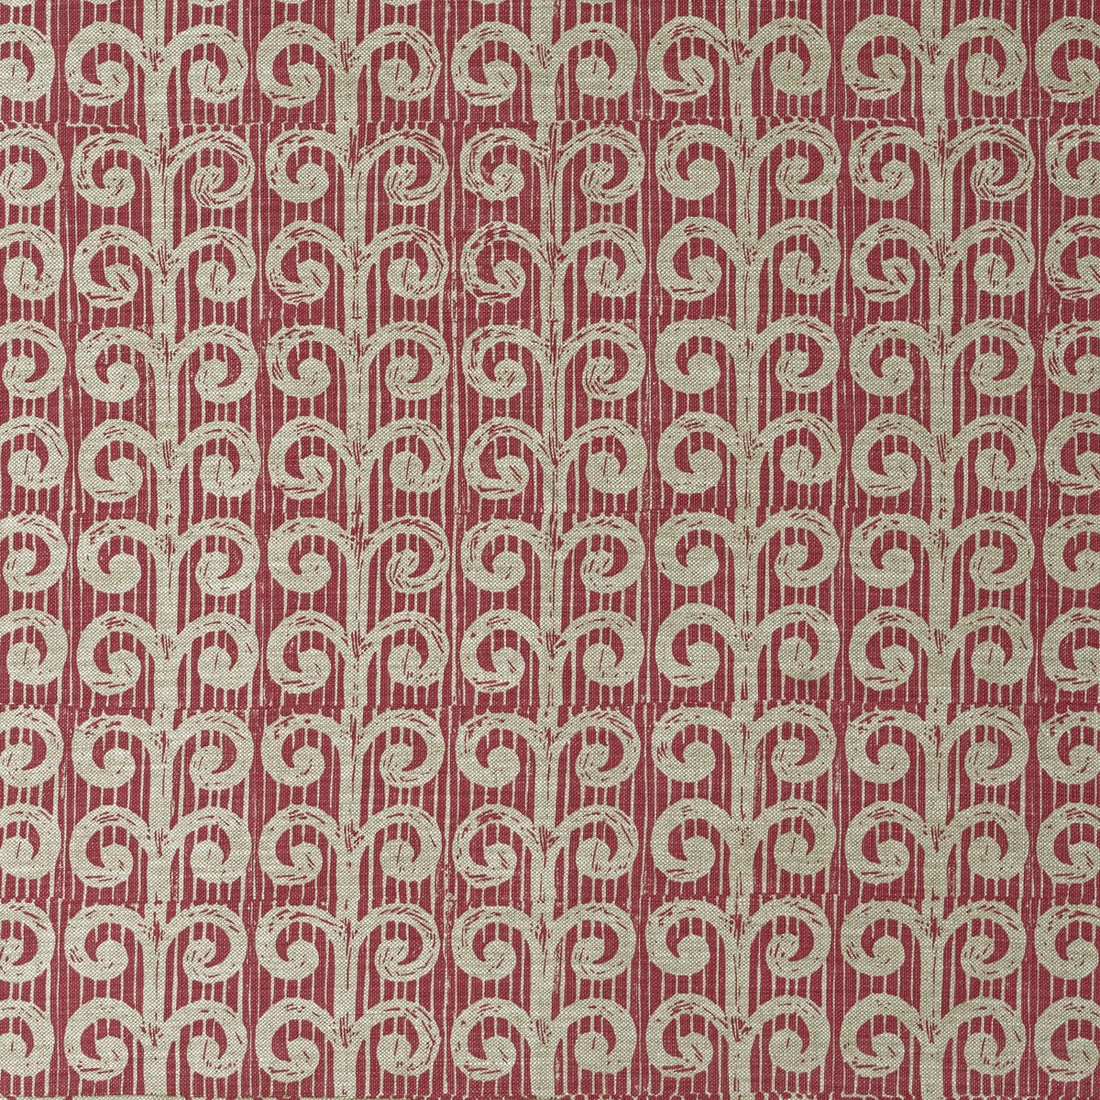 Fern fabric in ruby color - pattern BFC-3673.717.0 - by Lee Jofa in the Blithfield collection